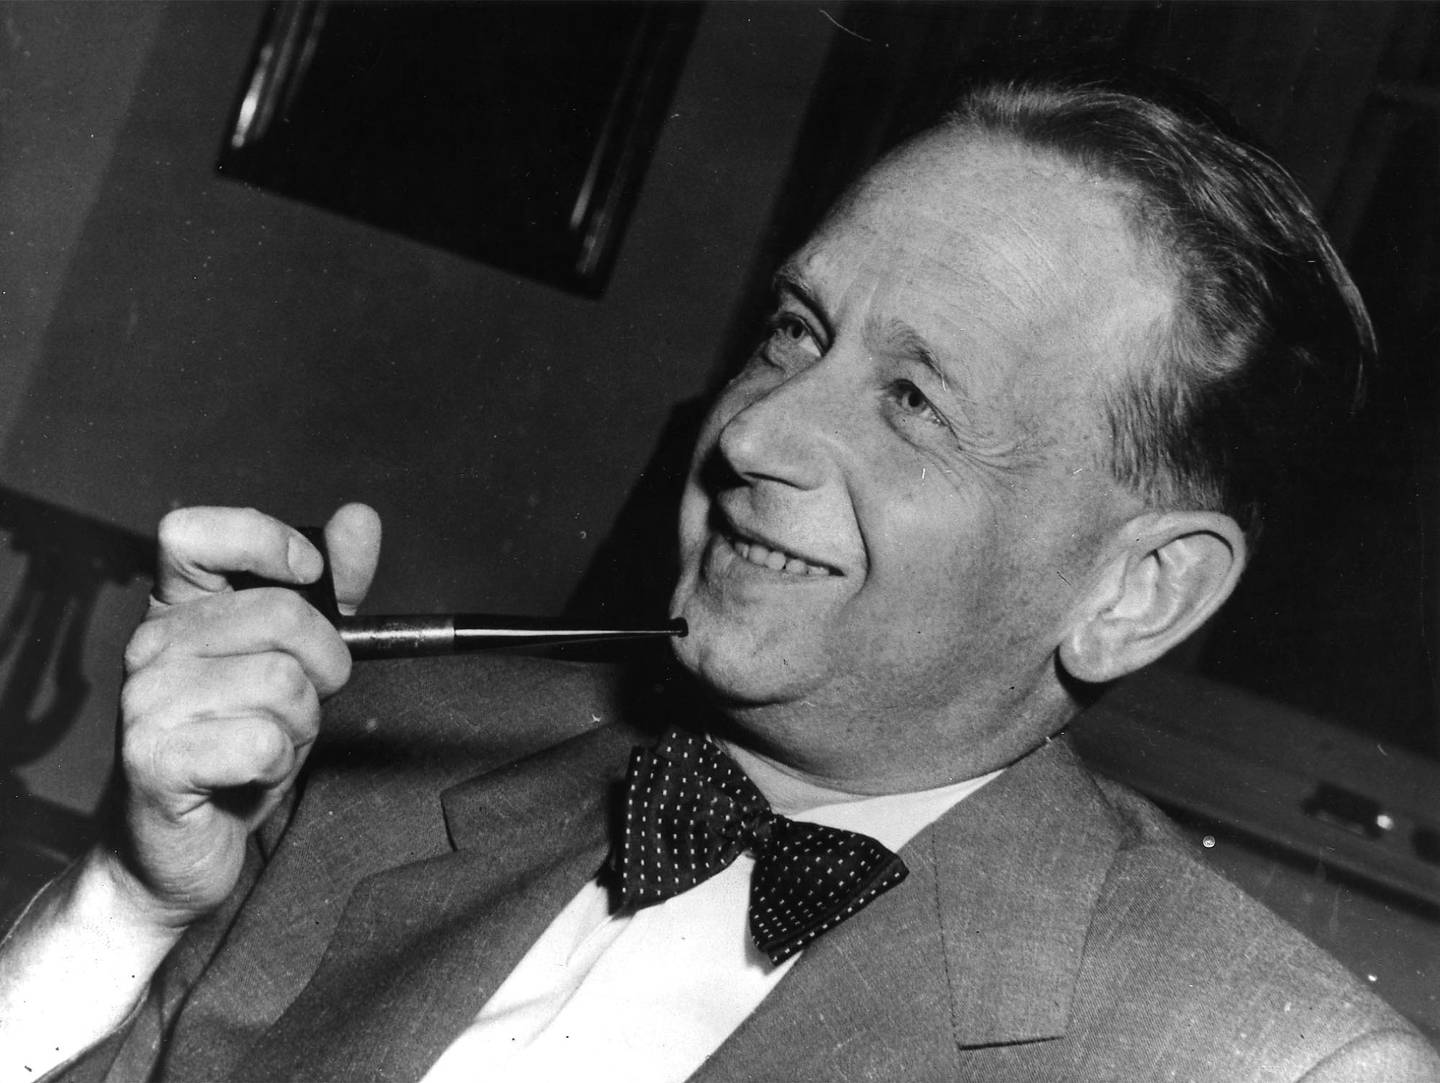 FILE - In this May 19, 1953 file photo, Dag Hammarskjold, recently appointed secretary general of the United Nations who is on a visit to Sweden, smokes his pipe at a press conference held at the Foreign Office in Stockholm. Americas National Security Agency may hold crucial evidence about one of the greatest unsolved mysteries of the Cold War _ the cause of the 1961 plane crash which killed United Nations Secretary-General Dag Hammarskjold, a commission which reviewed the case said Monday, Sept. 9, 2013. Widely considered the U.N.s most effective chief, Hammarskjold died as he was attempting to bring peace to the newly independent Congo. The crash of his DC-6 aircraft in the forest near Ndola Airport in modern-day Zambia has bred a rash of conspiracy theories, many centering on some startling inconsistencies. (AP Photo)